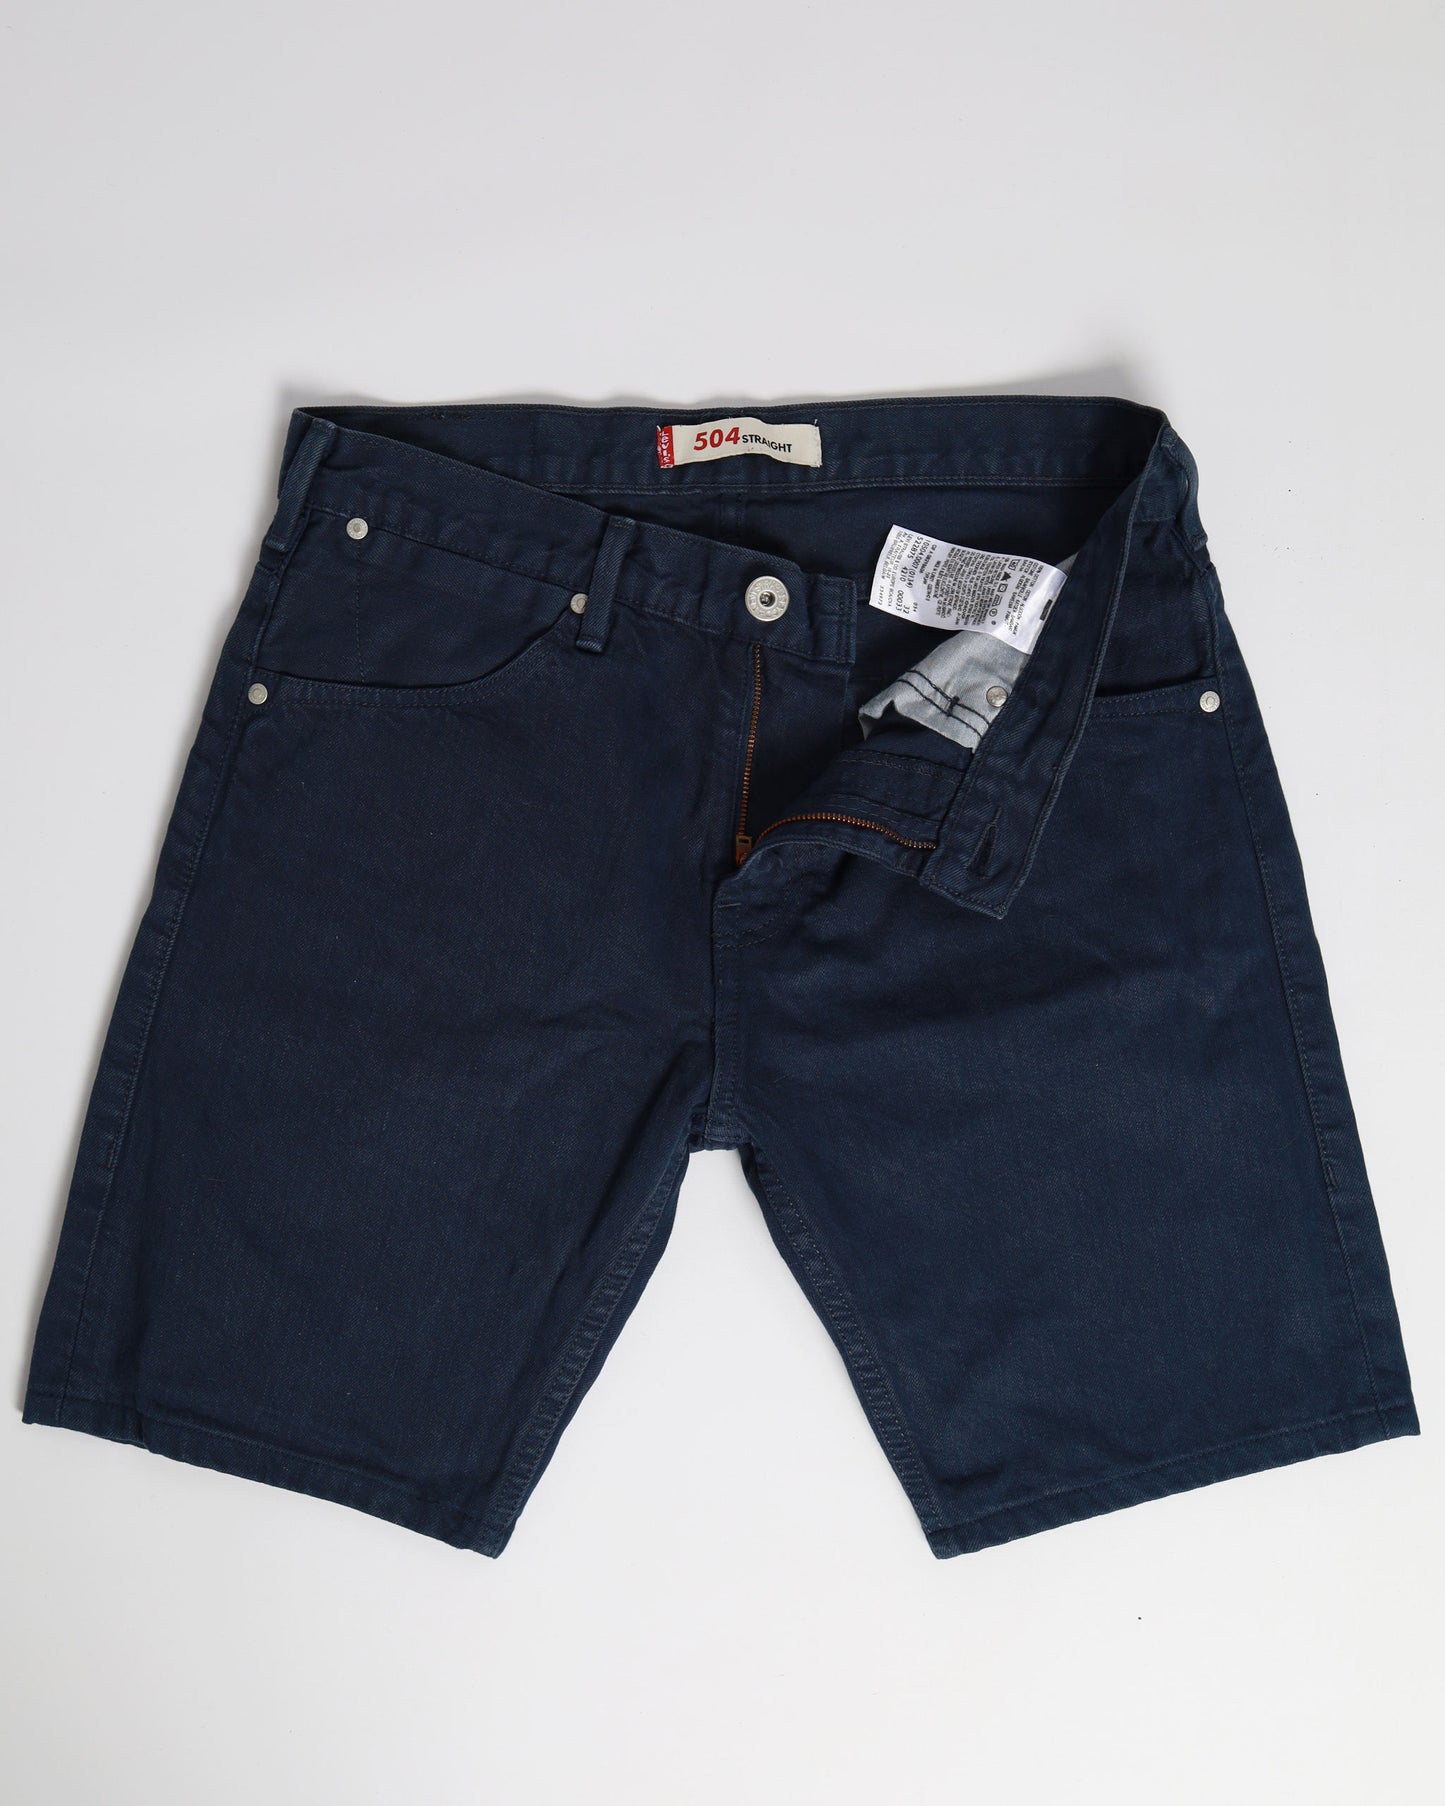 Levi’s 504 Straight Fit Shorts in Blue W31